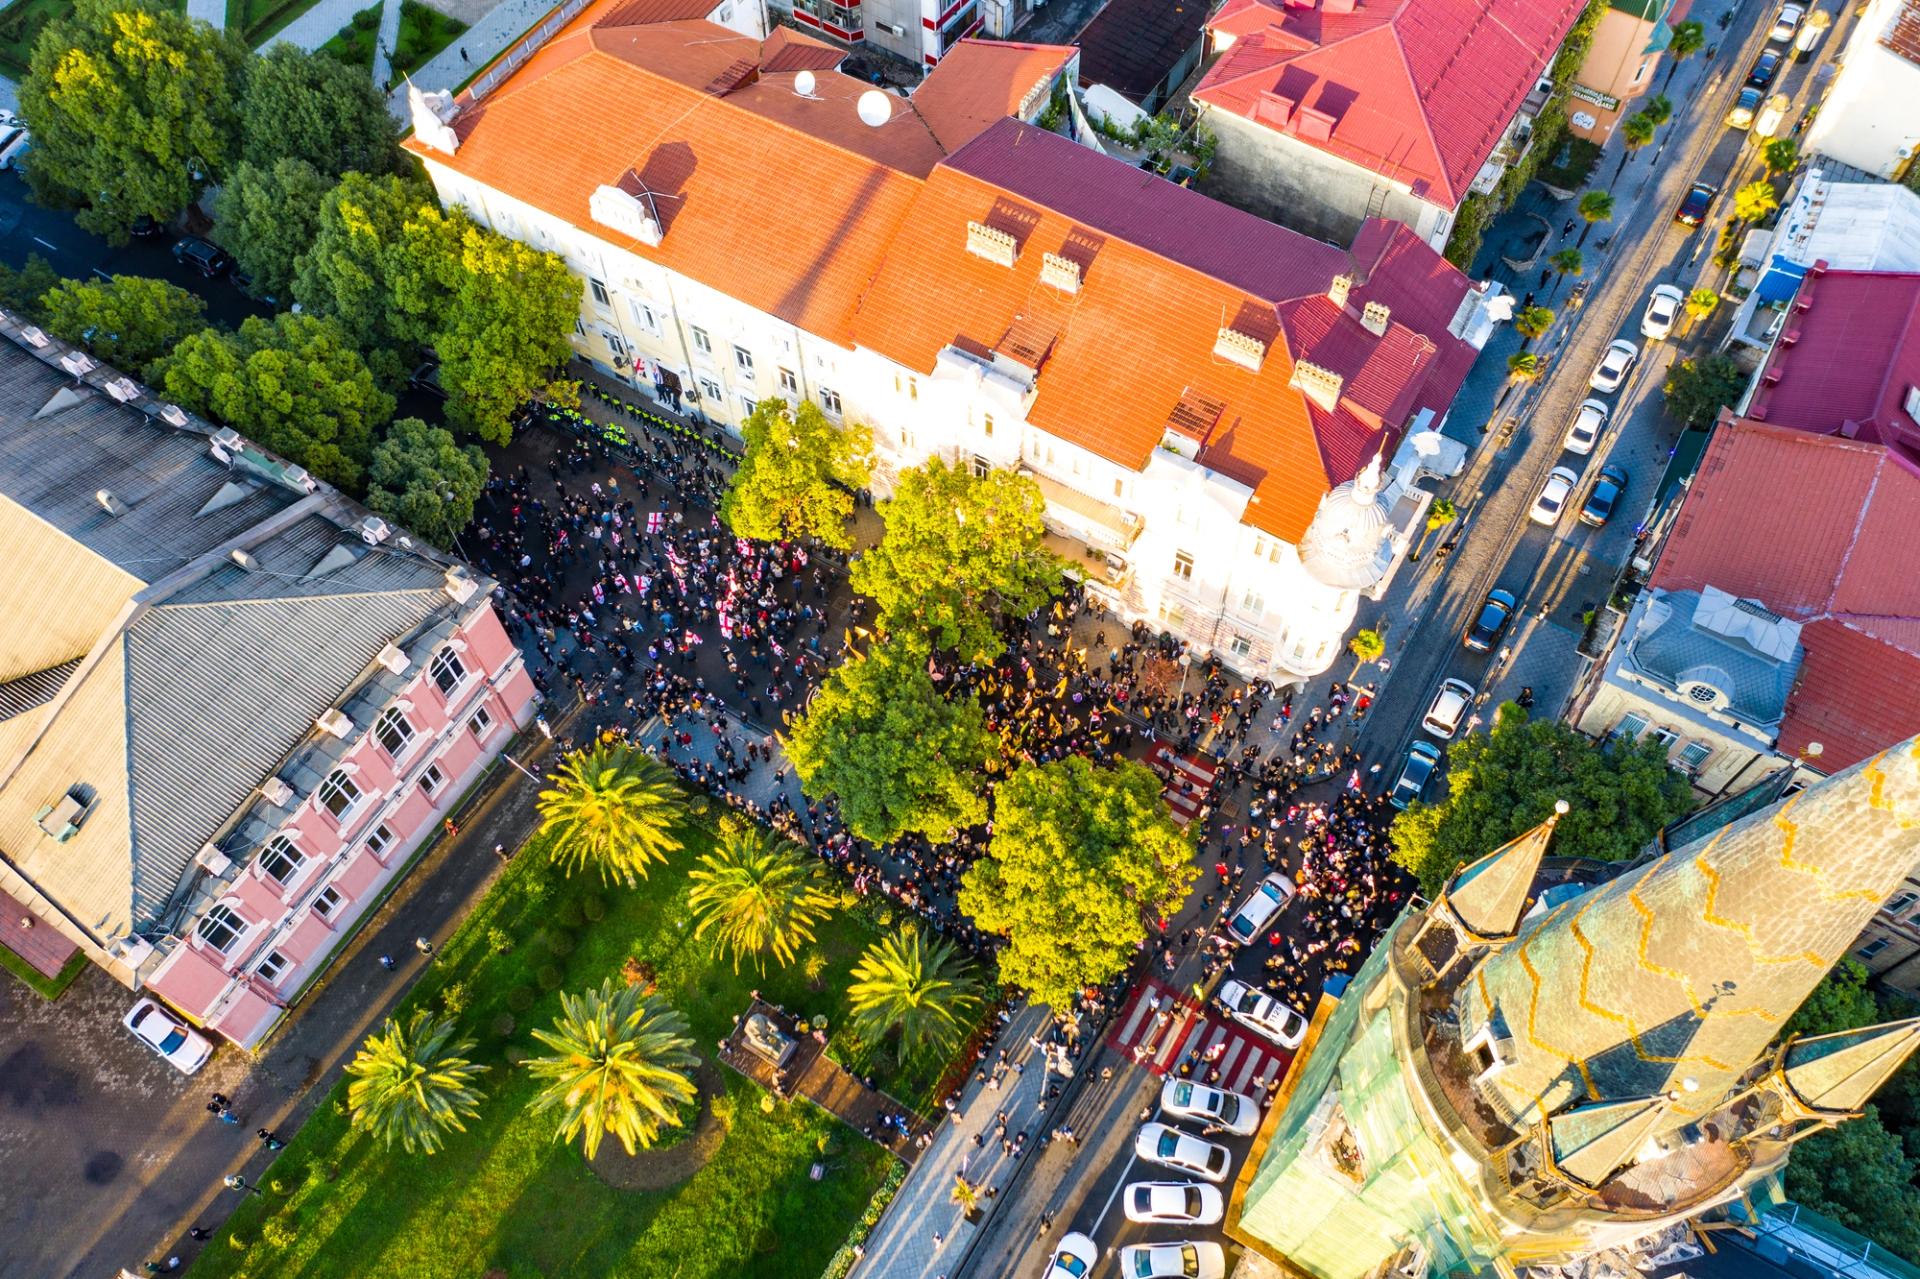 Photo of a protest march taken from a drone above a city street.